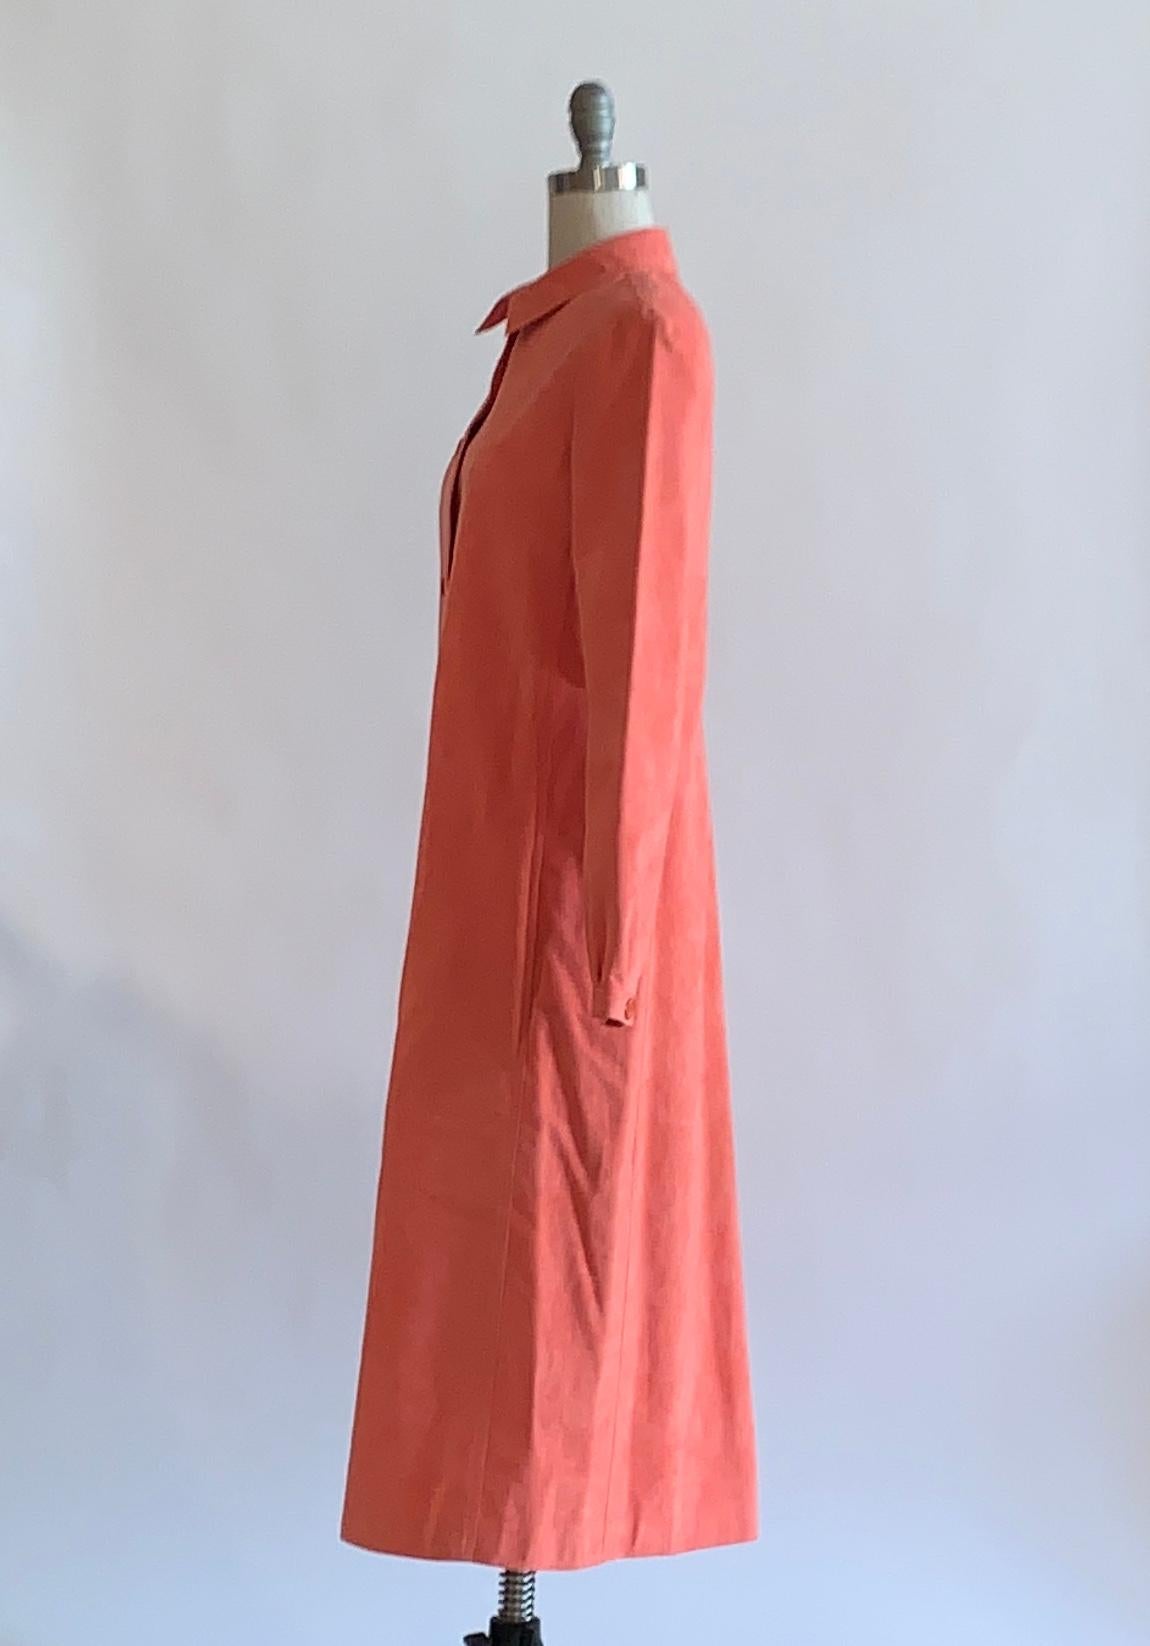 Vintage Halston 1970s collared long sleeve ultrasuede coat in an amazing shade of orange-pink coral. Long sleeve, buttons at front and at cuffs. 

Content: Ultrasuede (soft, very real looking washable vegan leather/ faux suede.)

No size label,